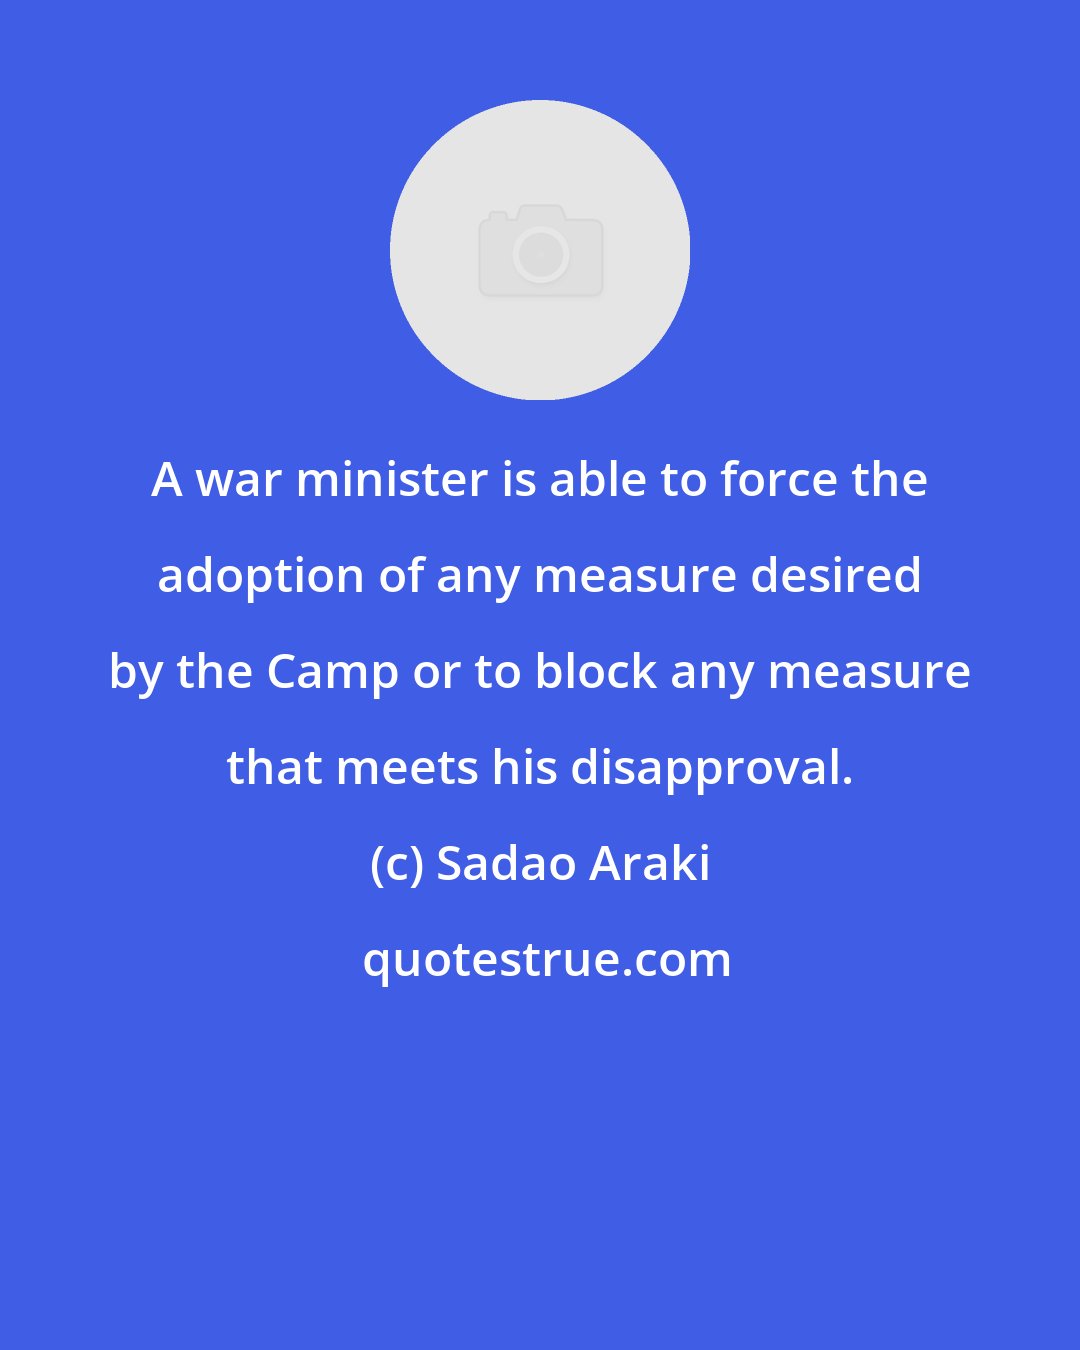 Sadao Araki: A war minister is able to force the adoption of any measure desired by the Camp or to block any measure that meets his disapproval.